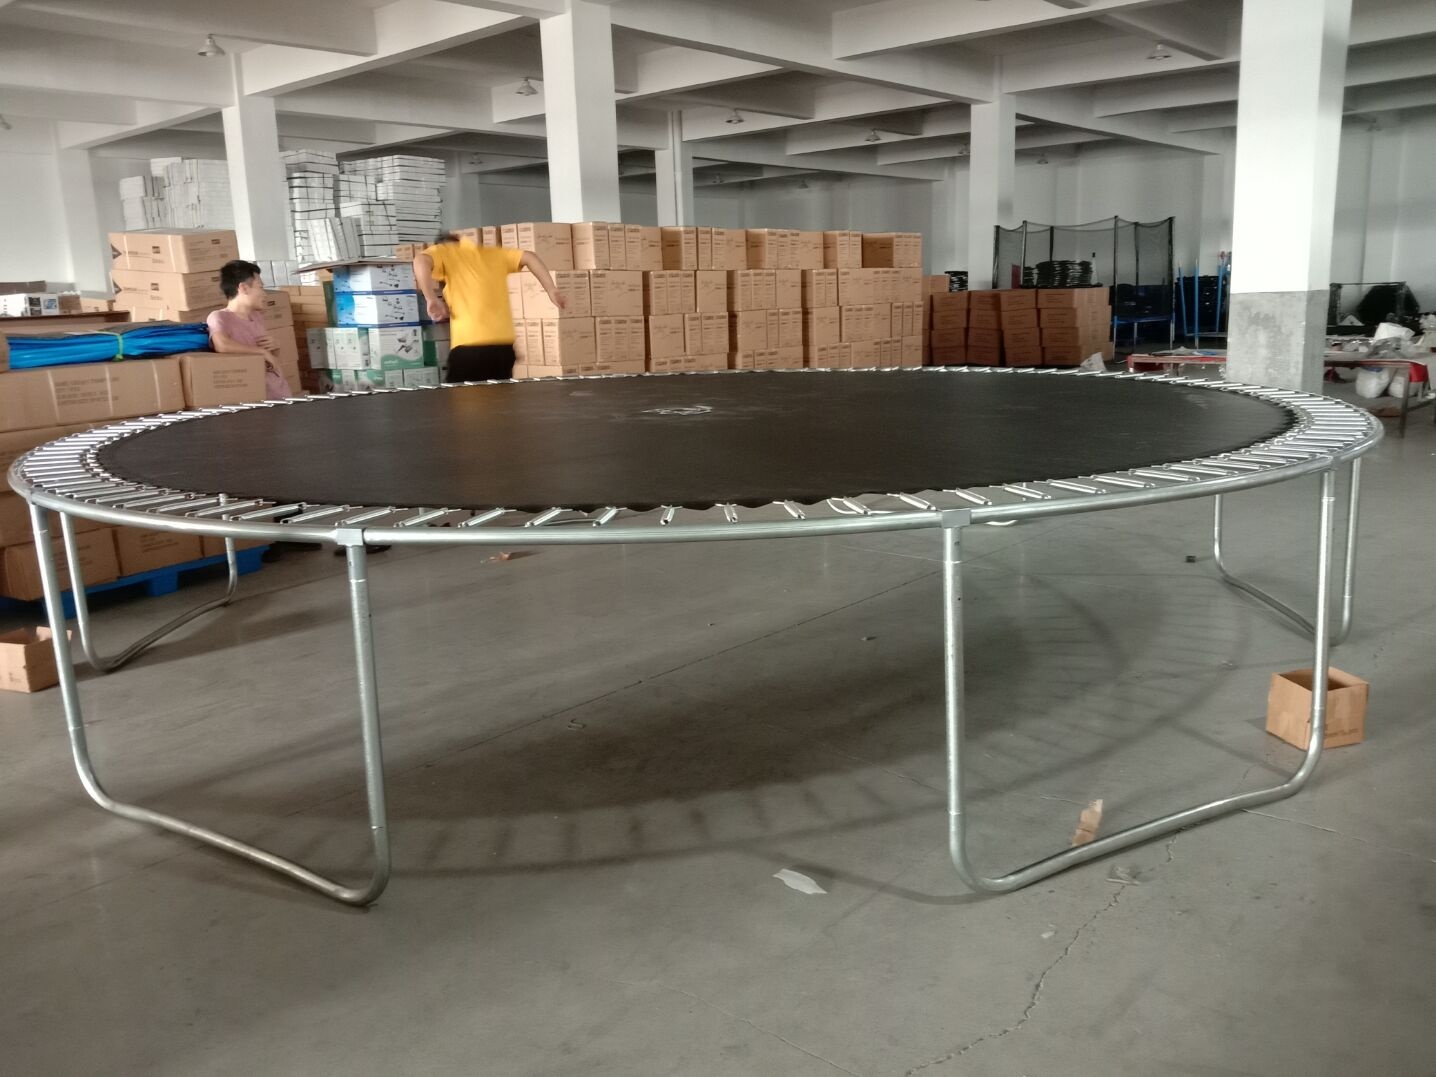 5FT-16 Trampoline with Safety Net